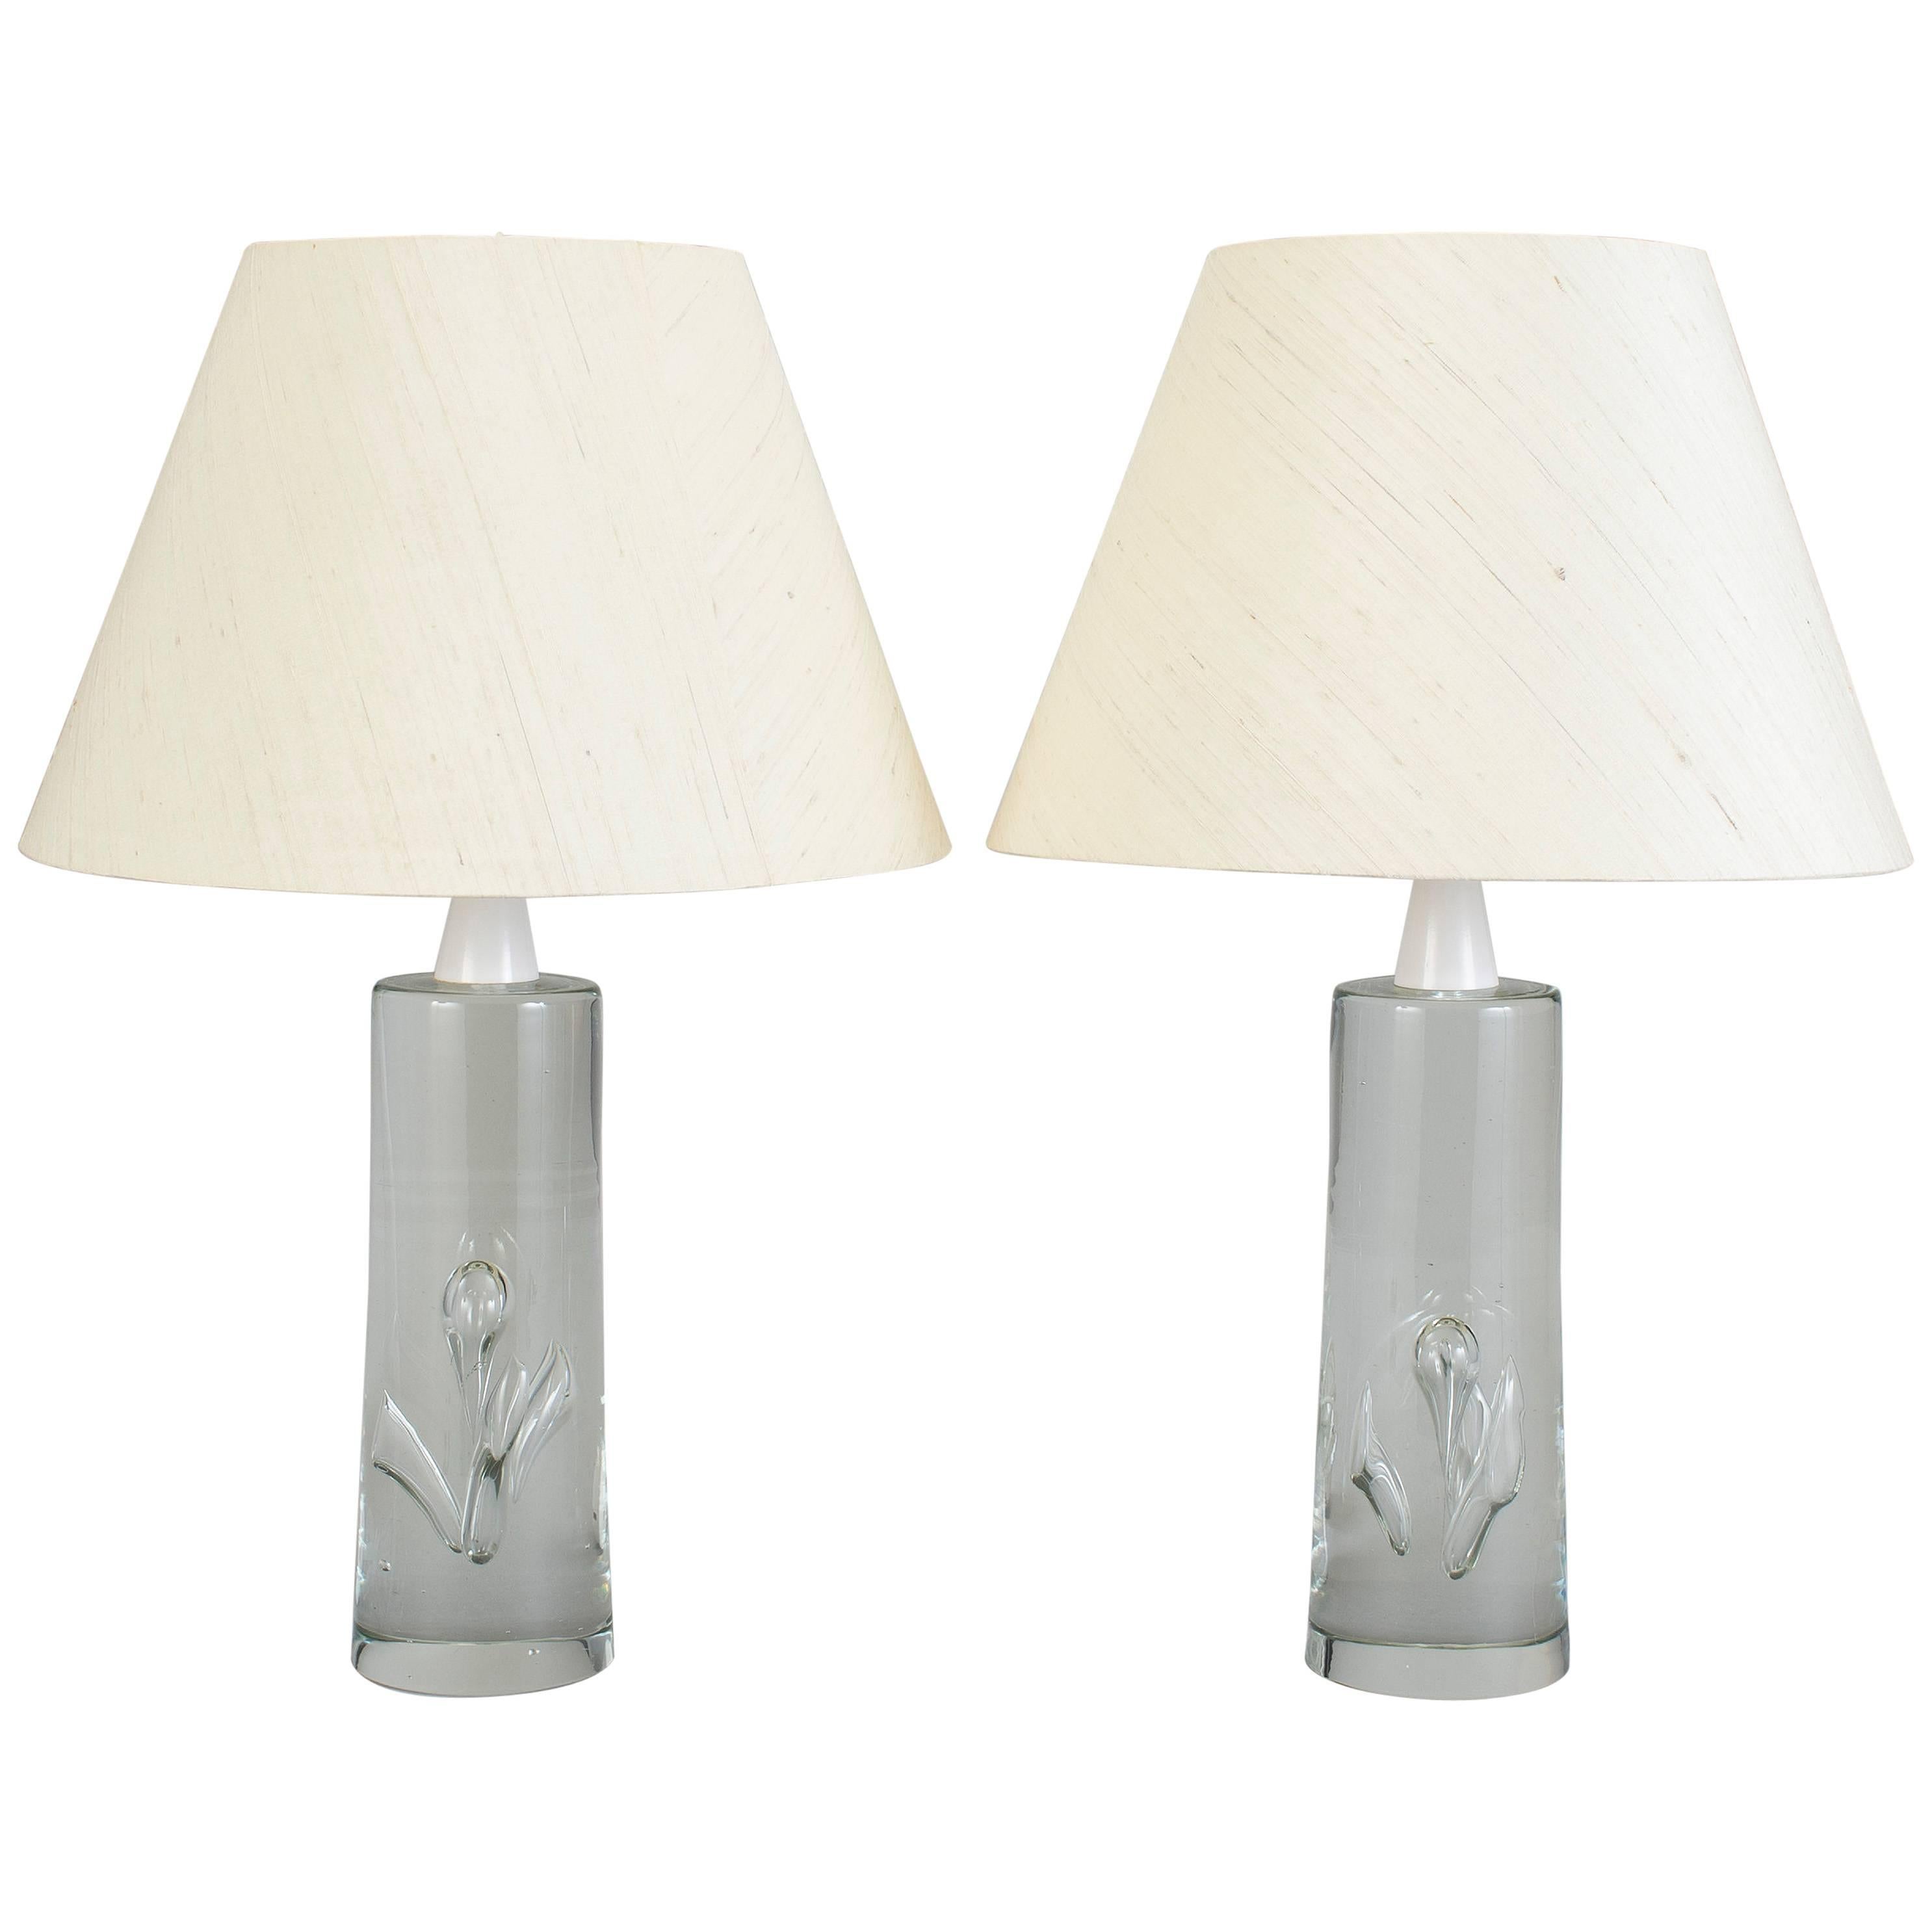 Rare Pair of Glass Table Lamps by Vicke Lindstrand, Sweden, 1950 For Sale